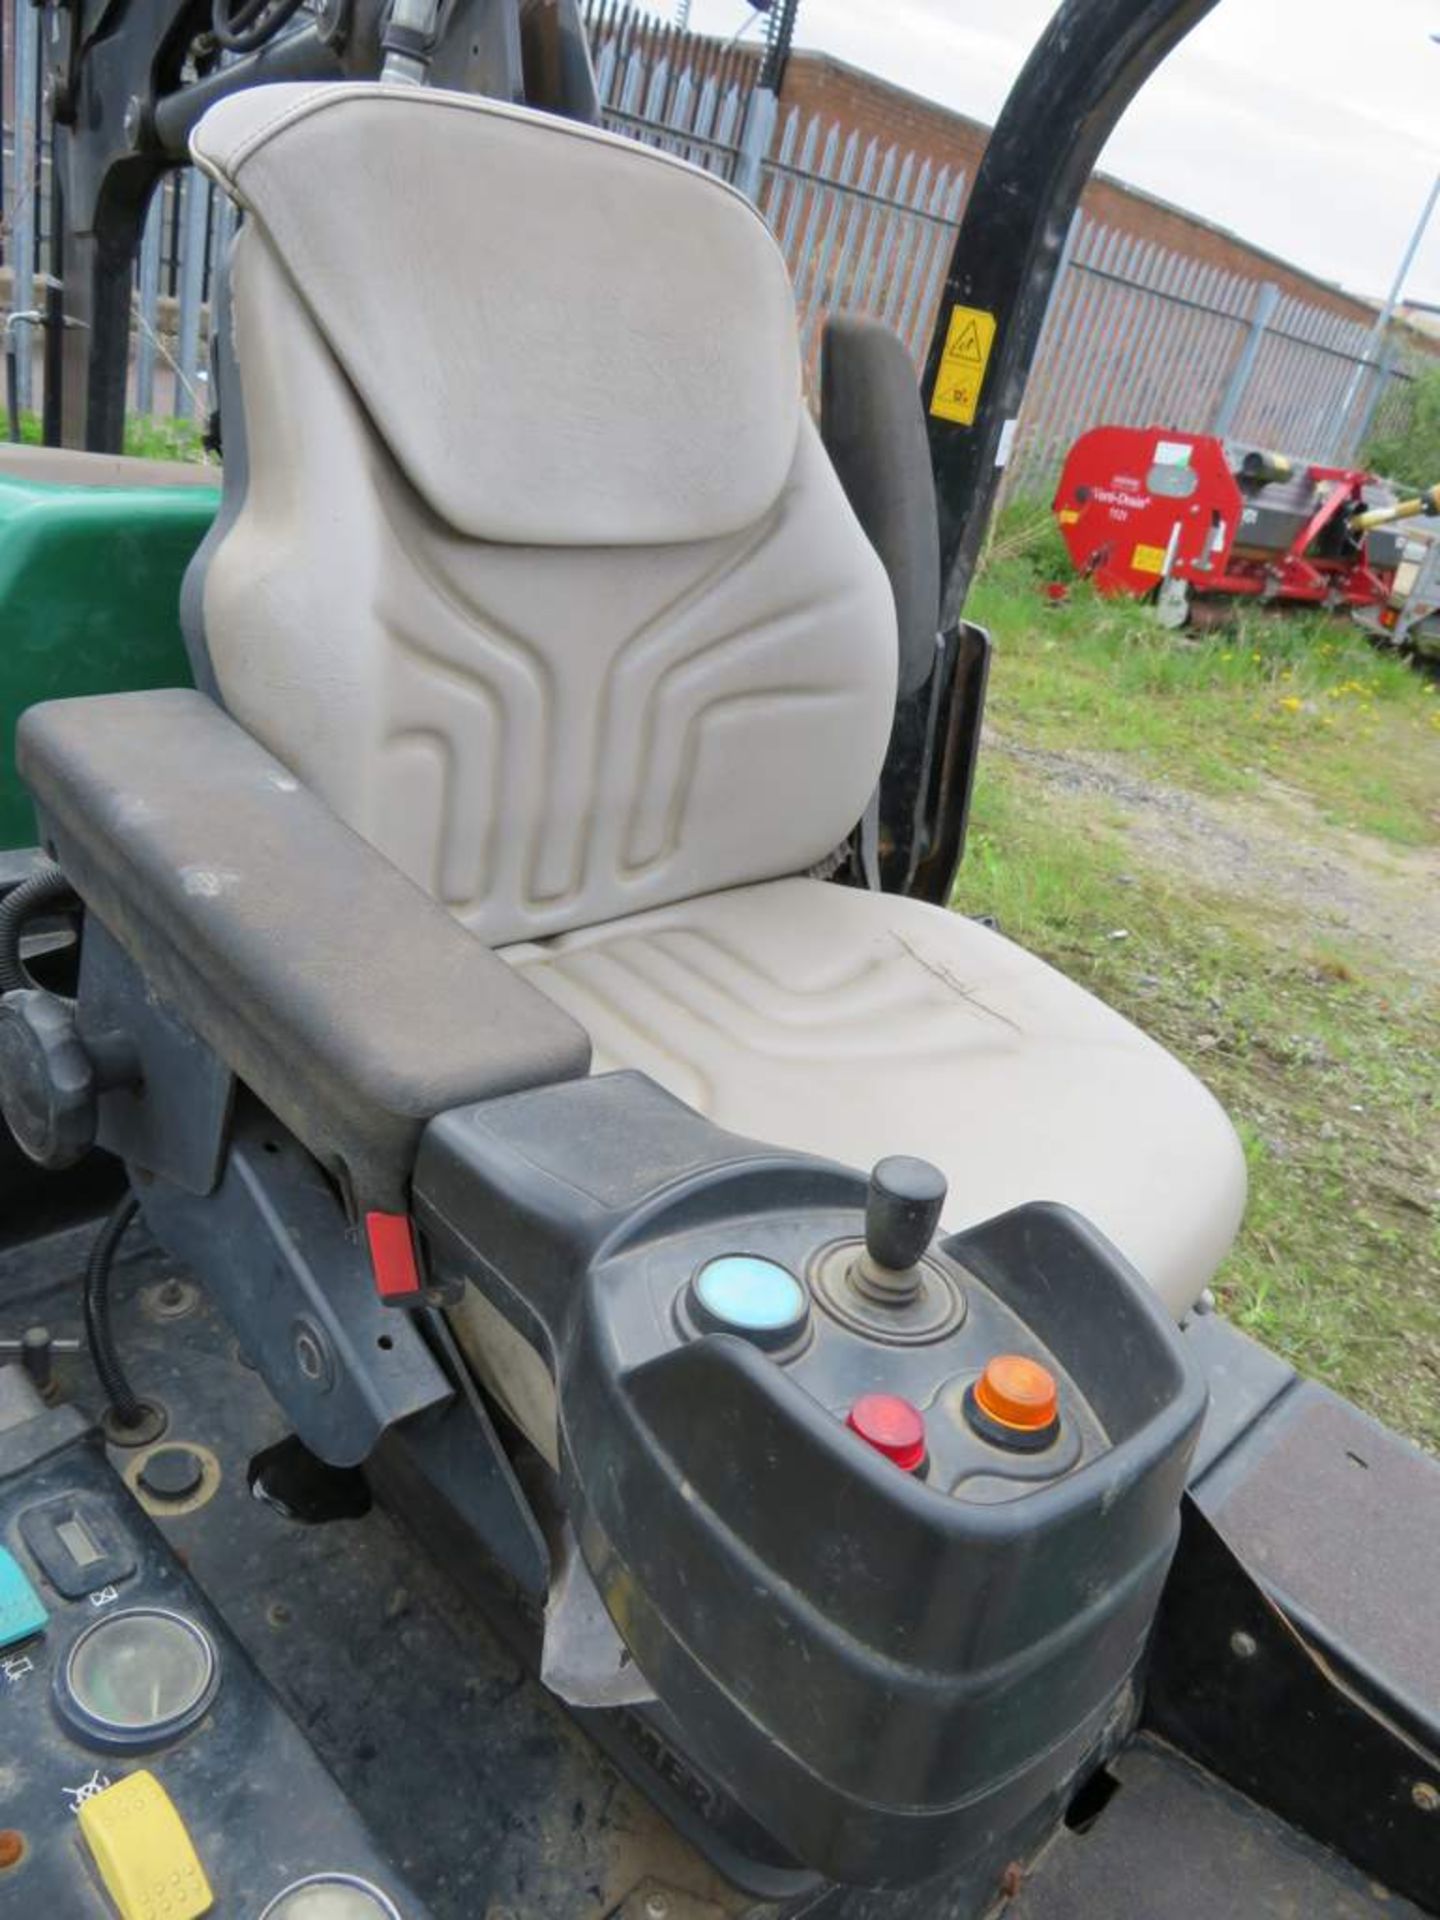 2009 Ransomes HR 3300T Out Front Cutting Deck Mower - FX09 ABF - Image 5 of 16